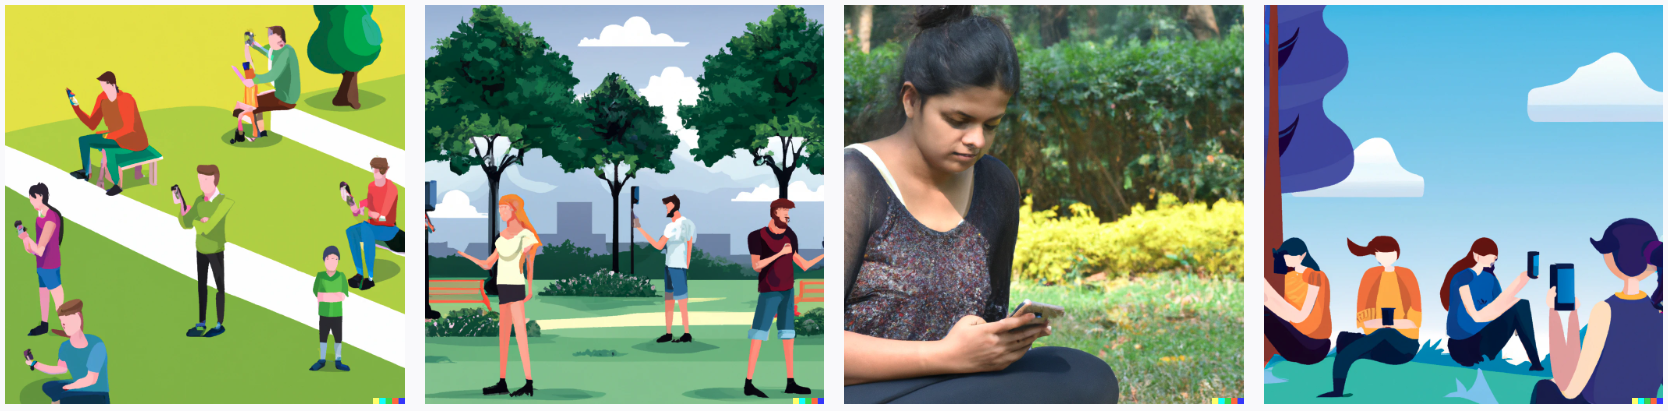 Source: DALL.E Prompt: humans in a park with smartphones